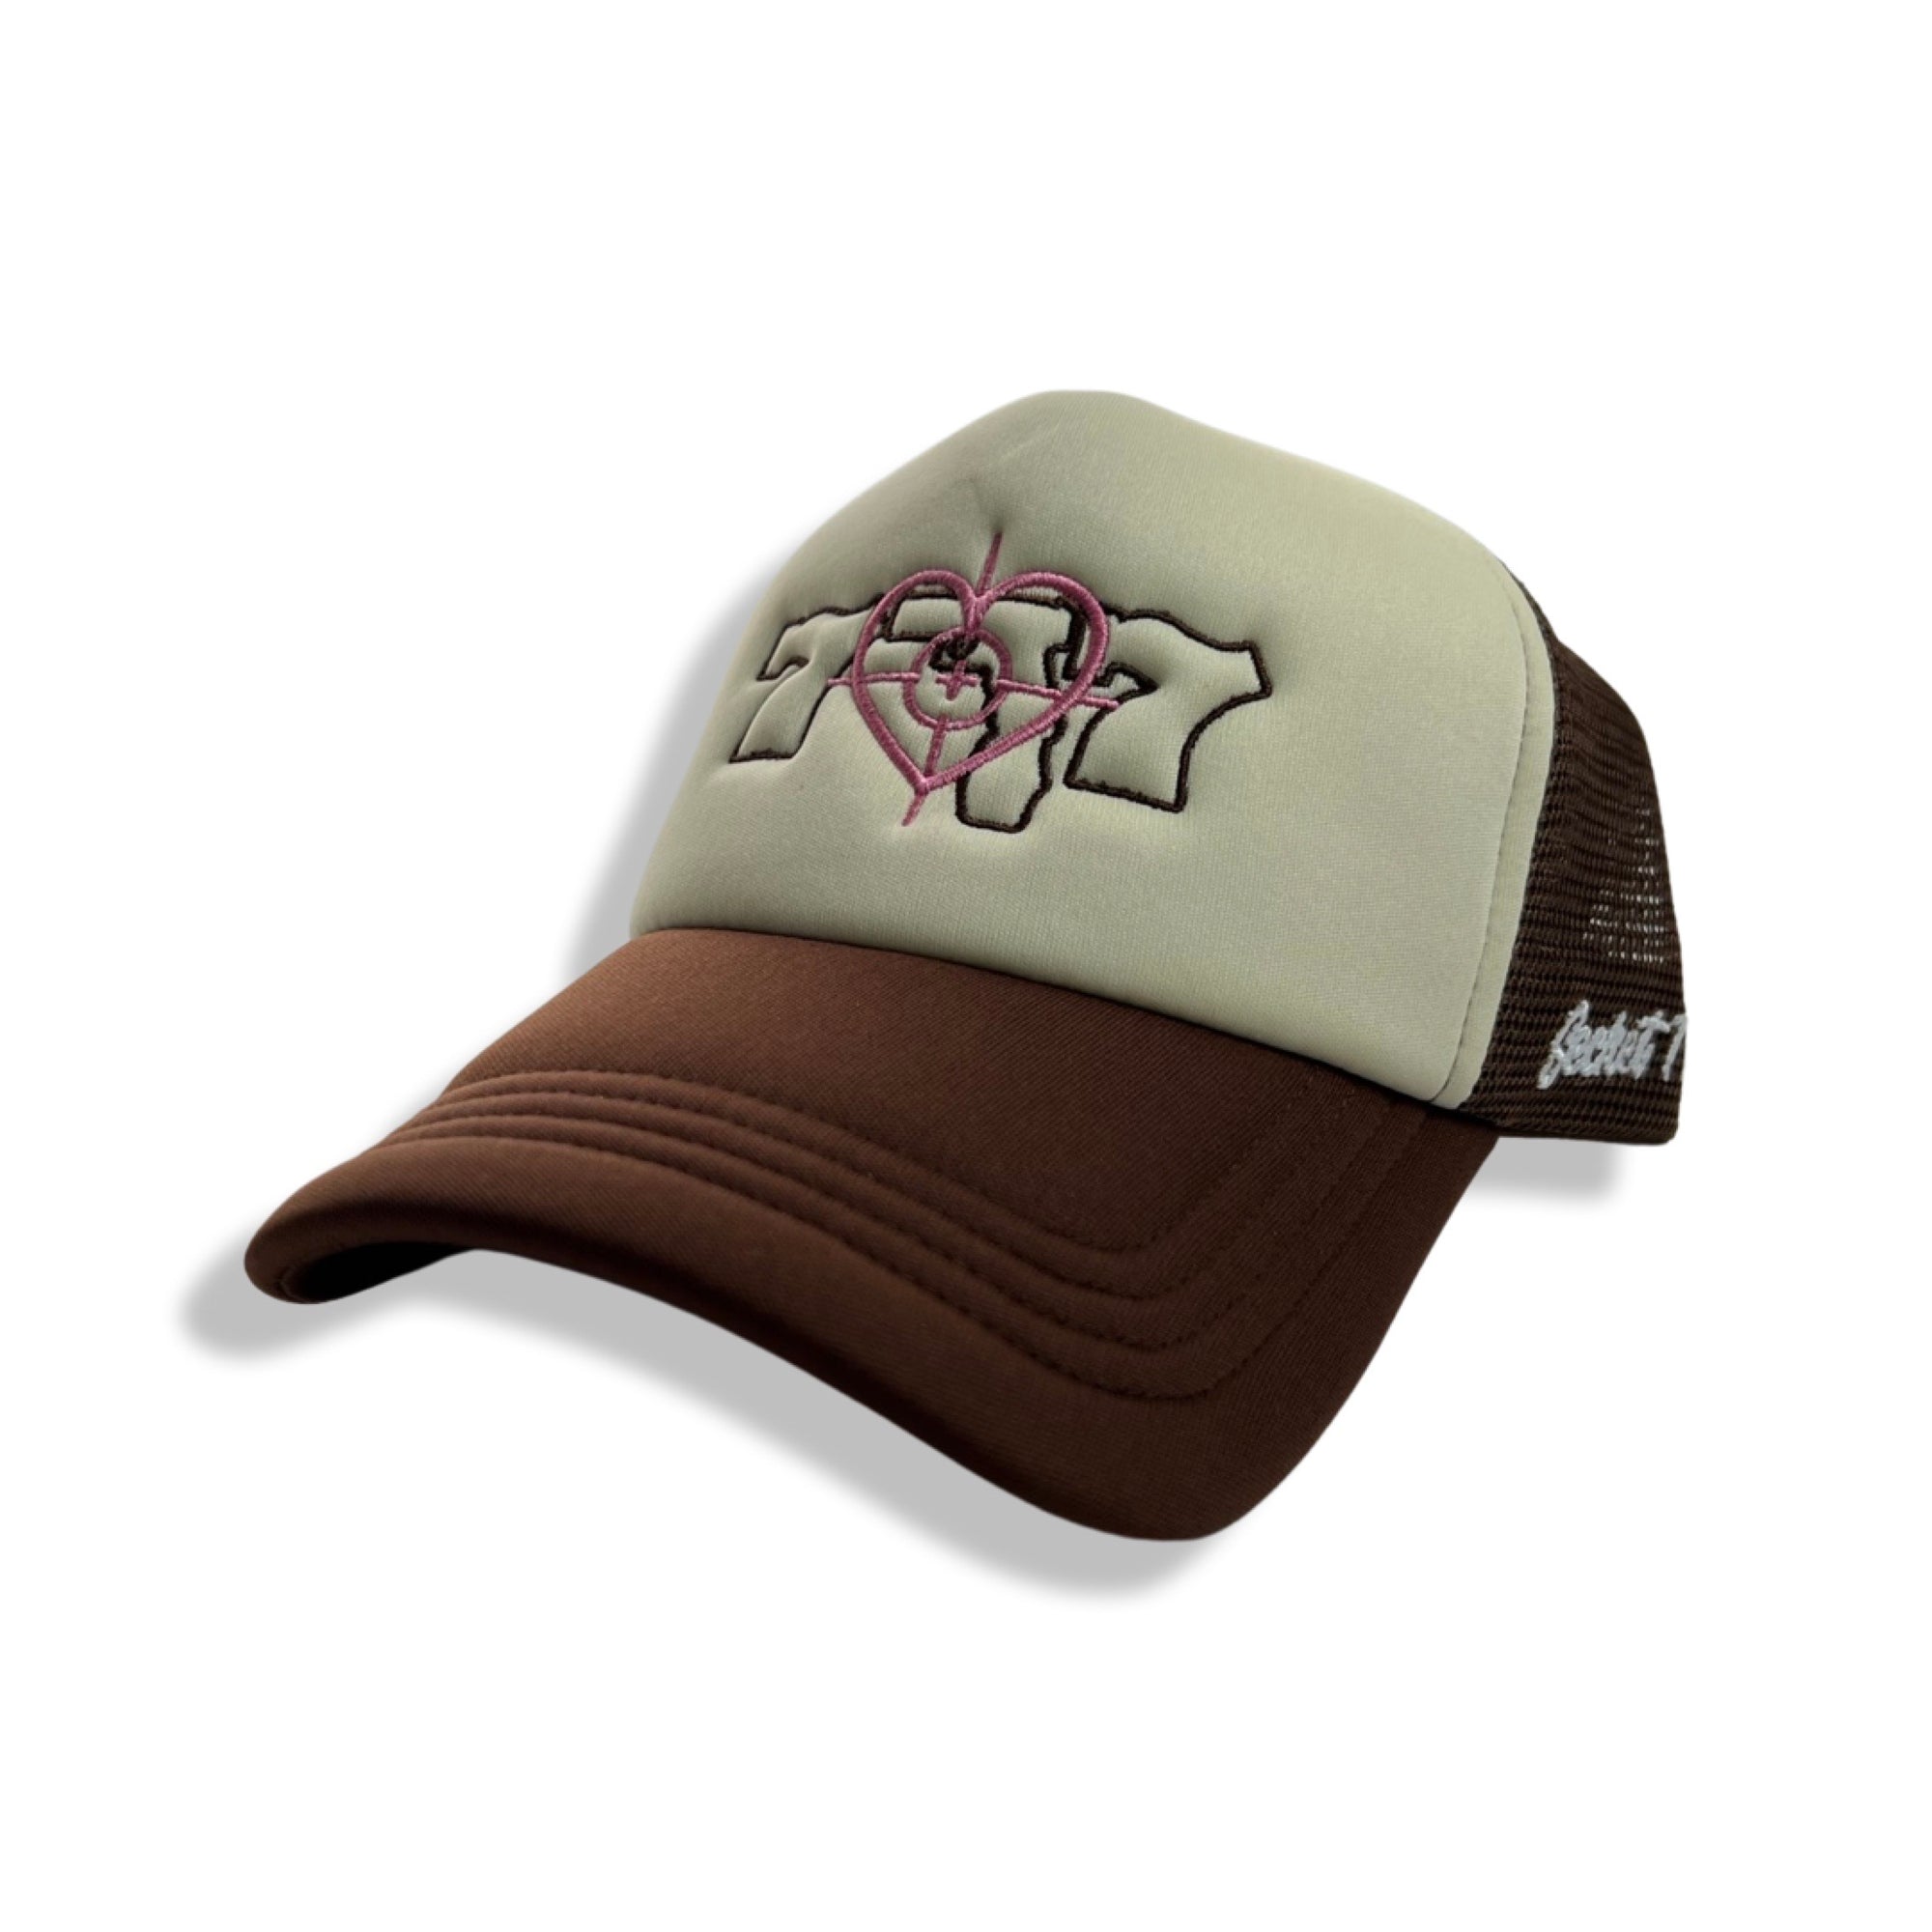 Brown and Tan 777 Trucker Hat (Pink Cross Hairs)